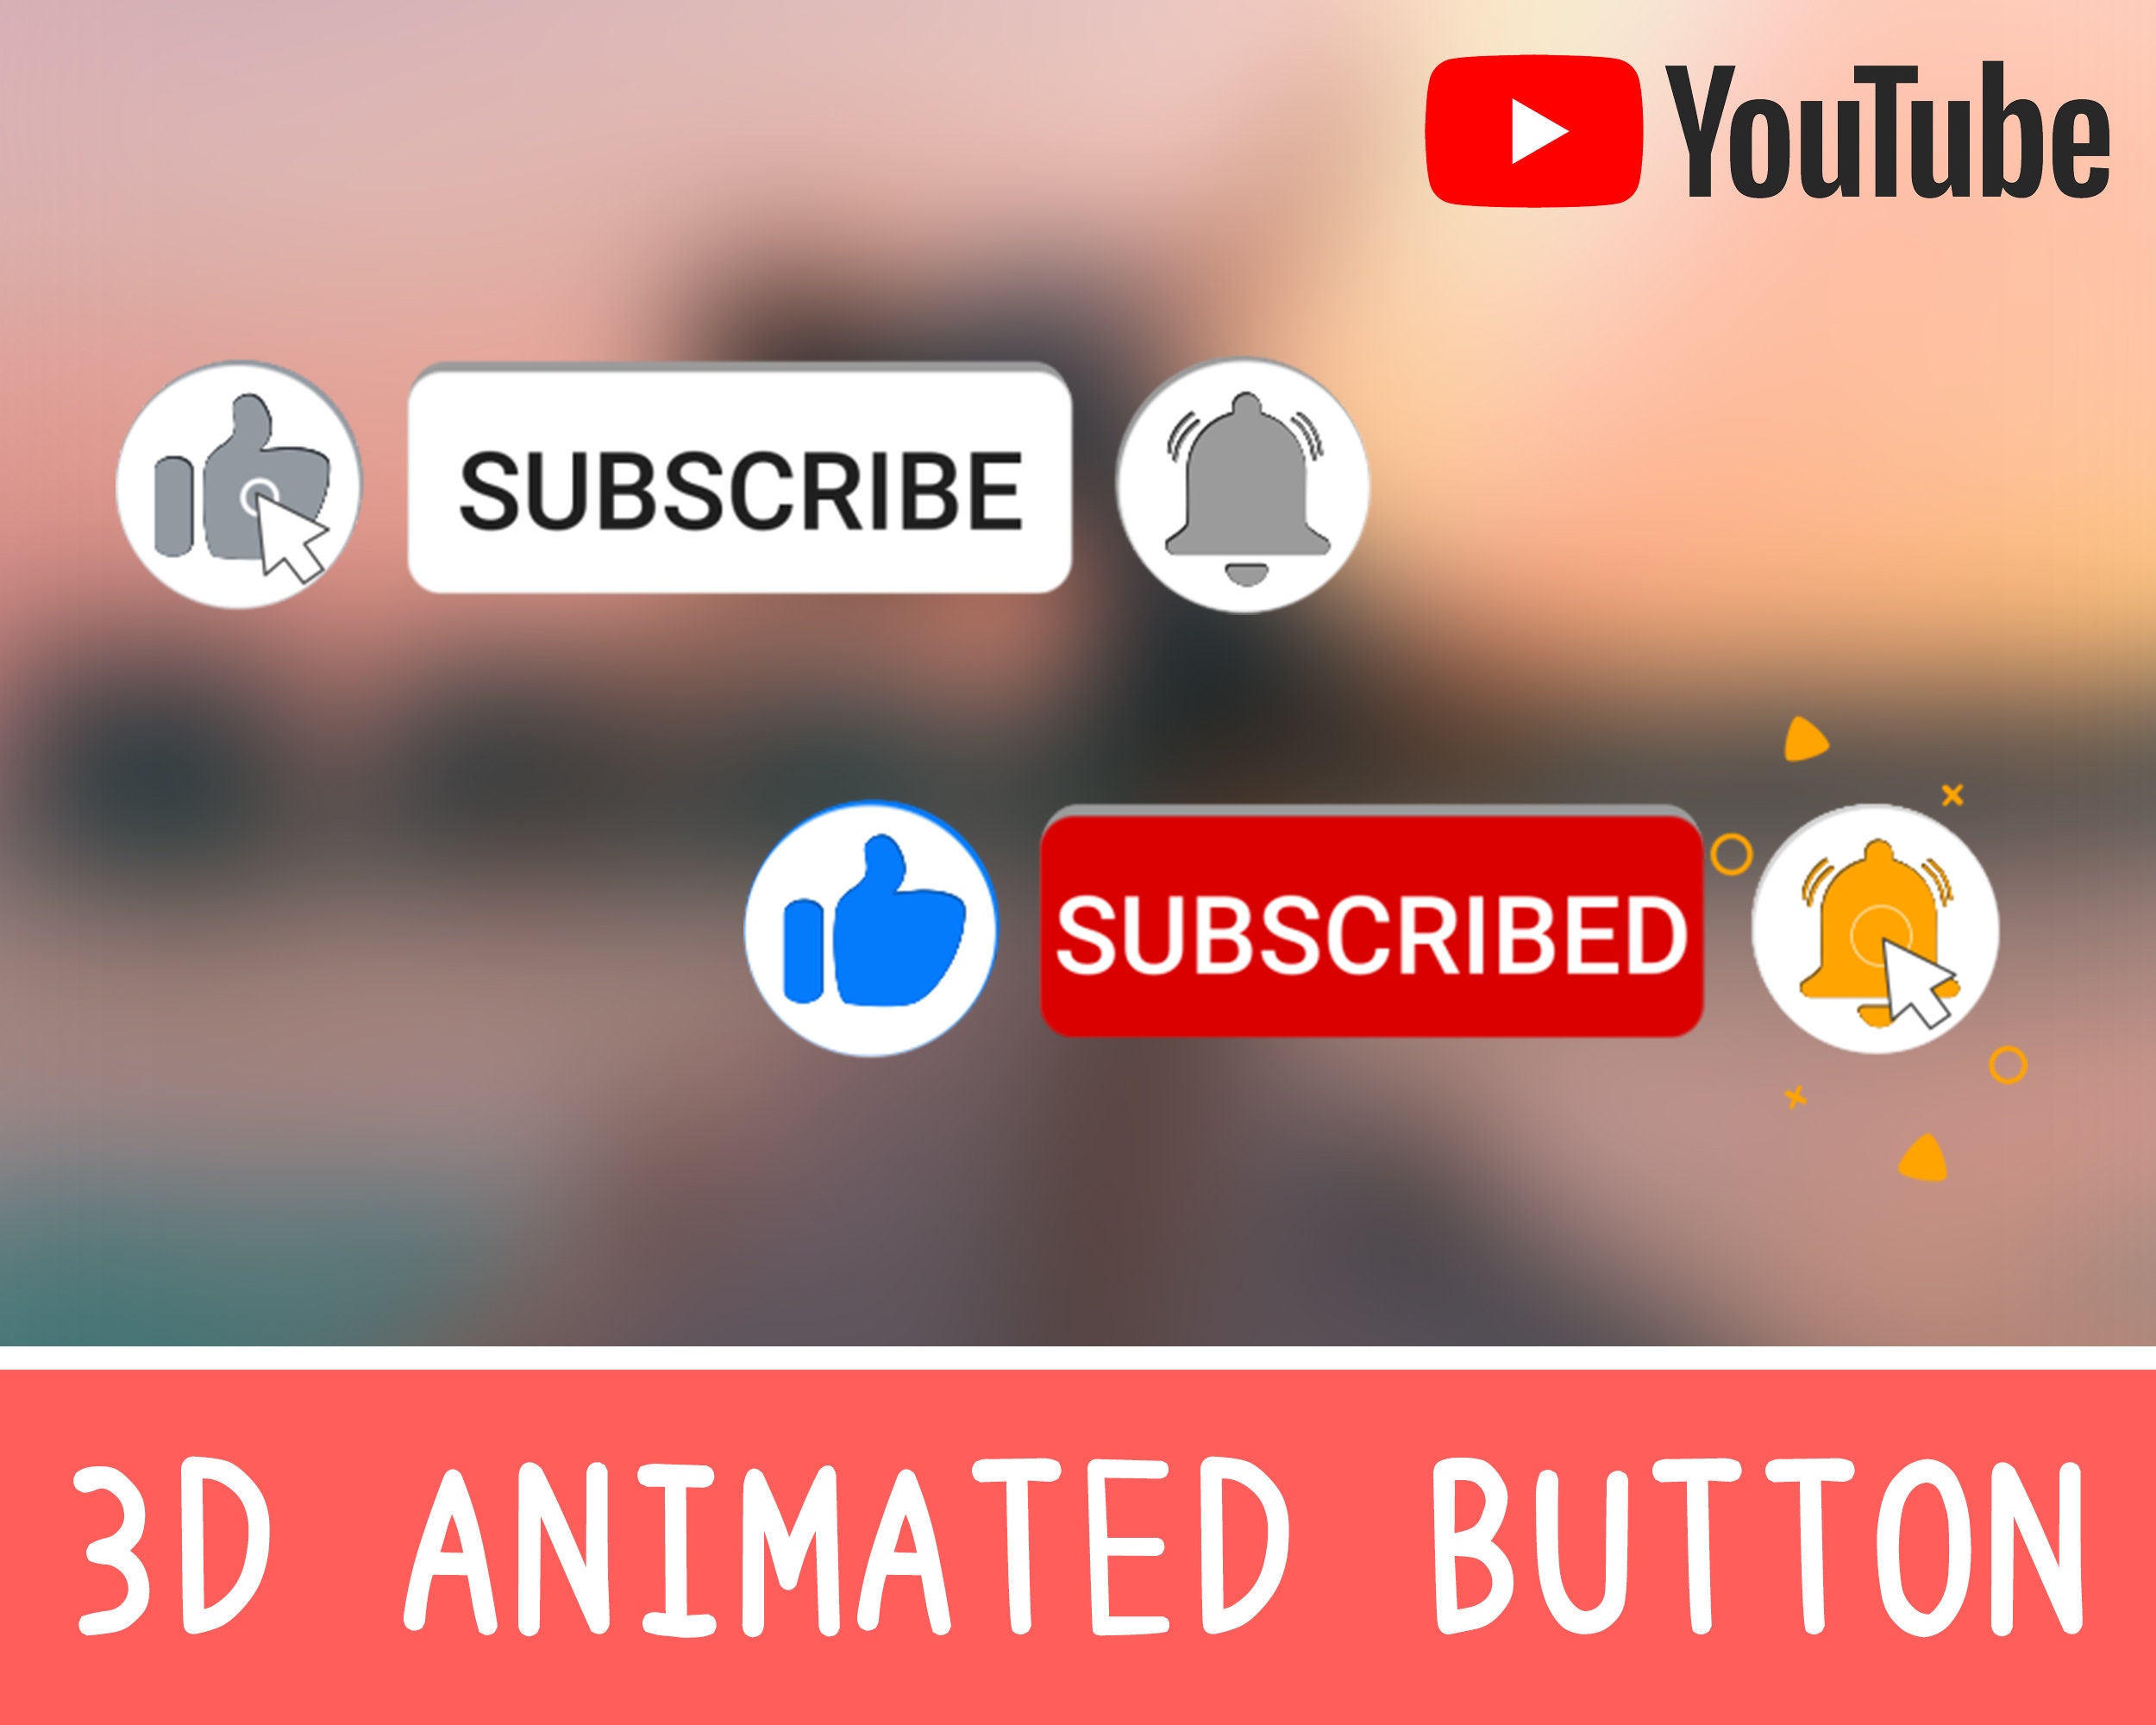 Like Subscribe And Bell Button For Youtube D Animated Etsy